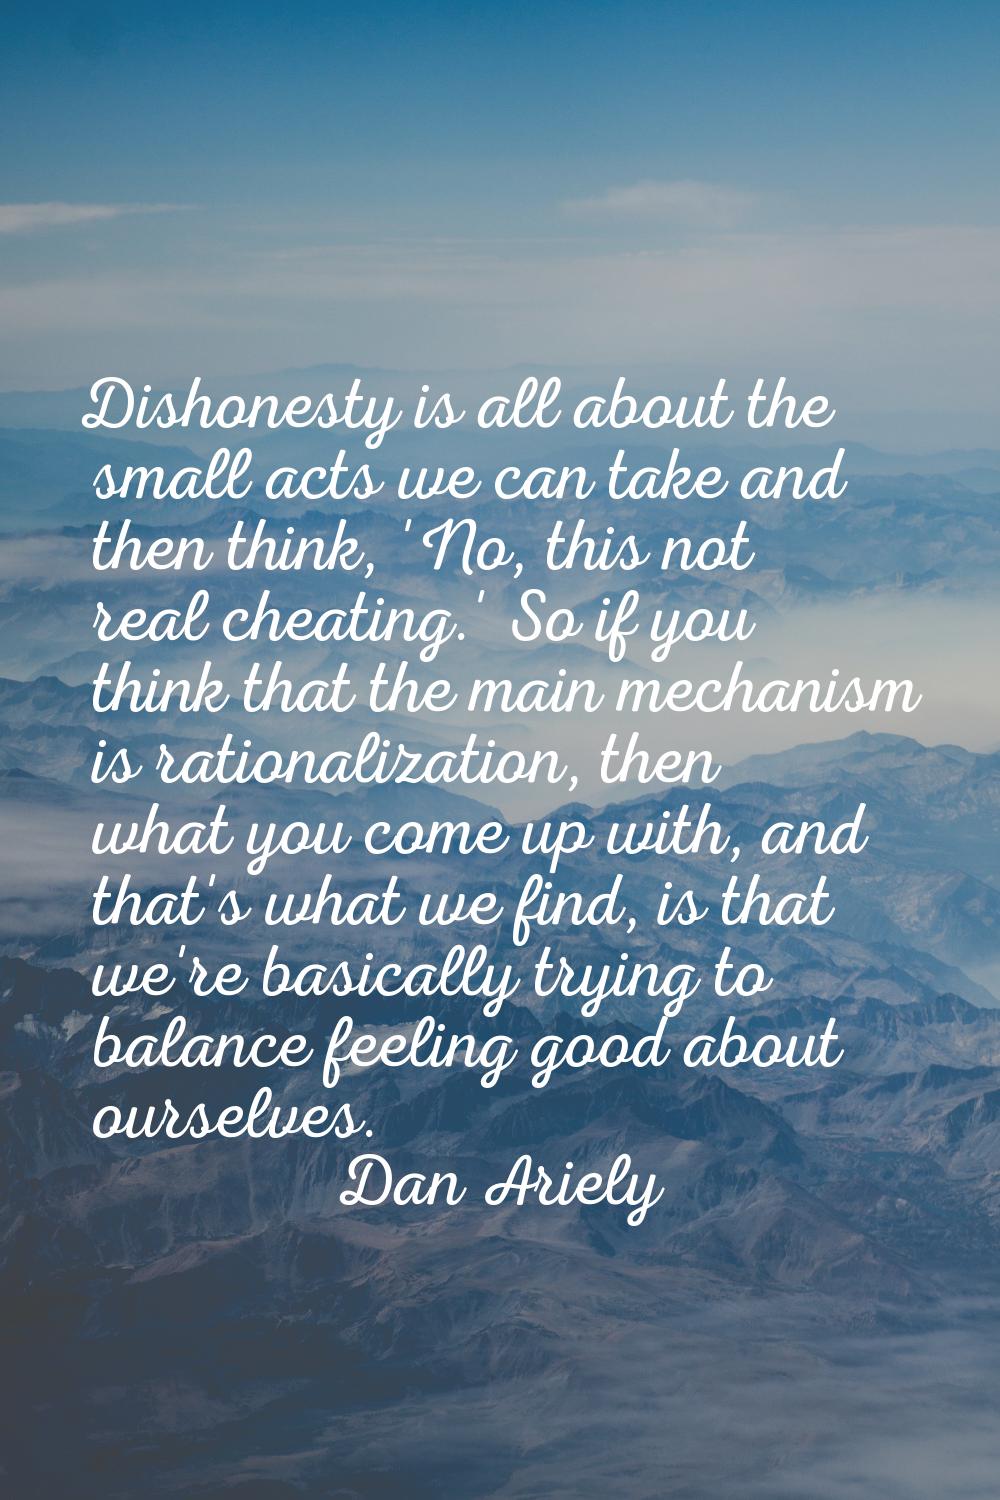 Dishonesty is all about the small acts we can take and then think, 'No, this not real cheating.' So